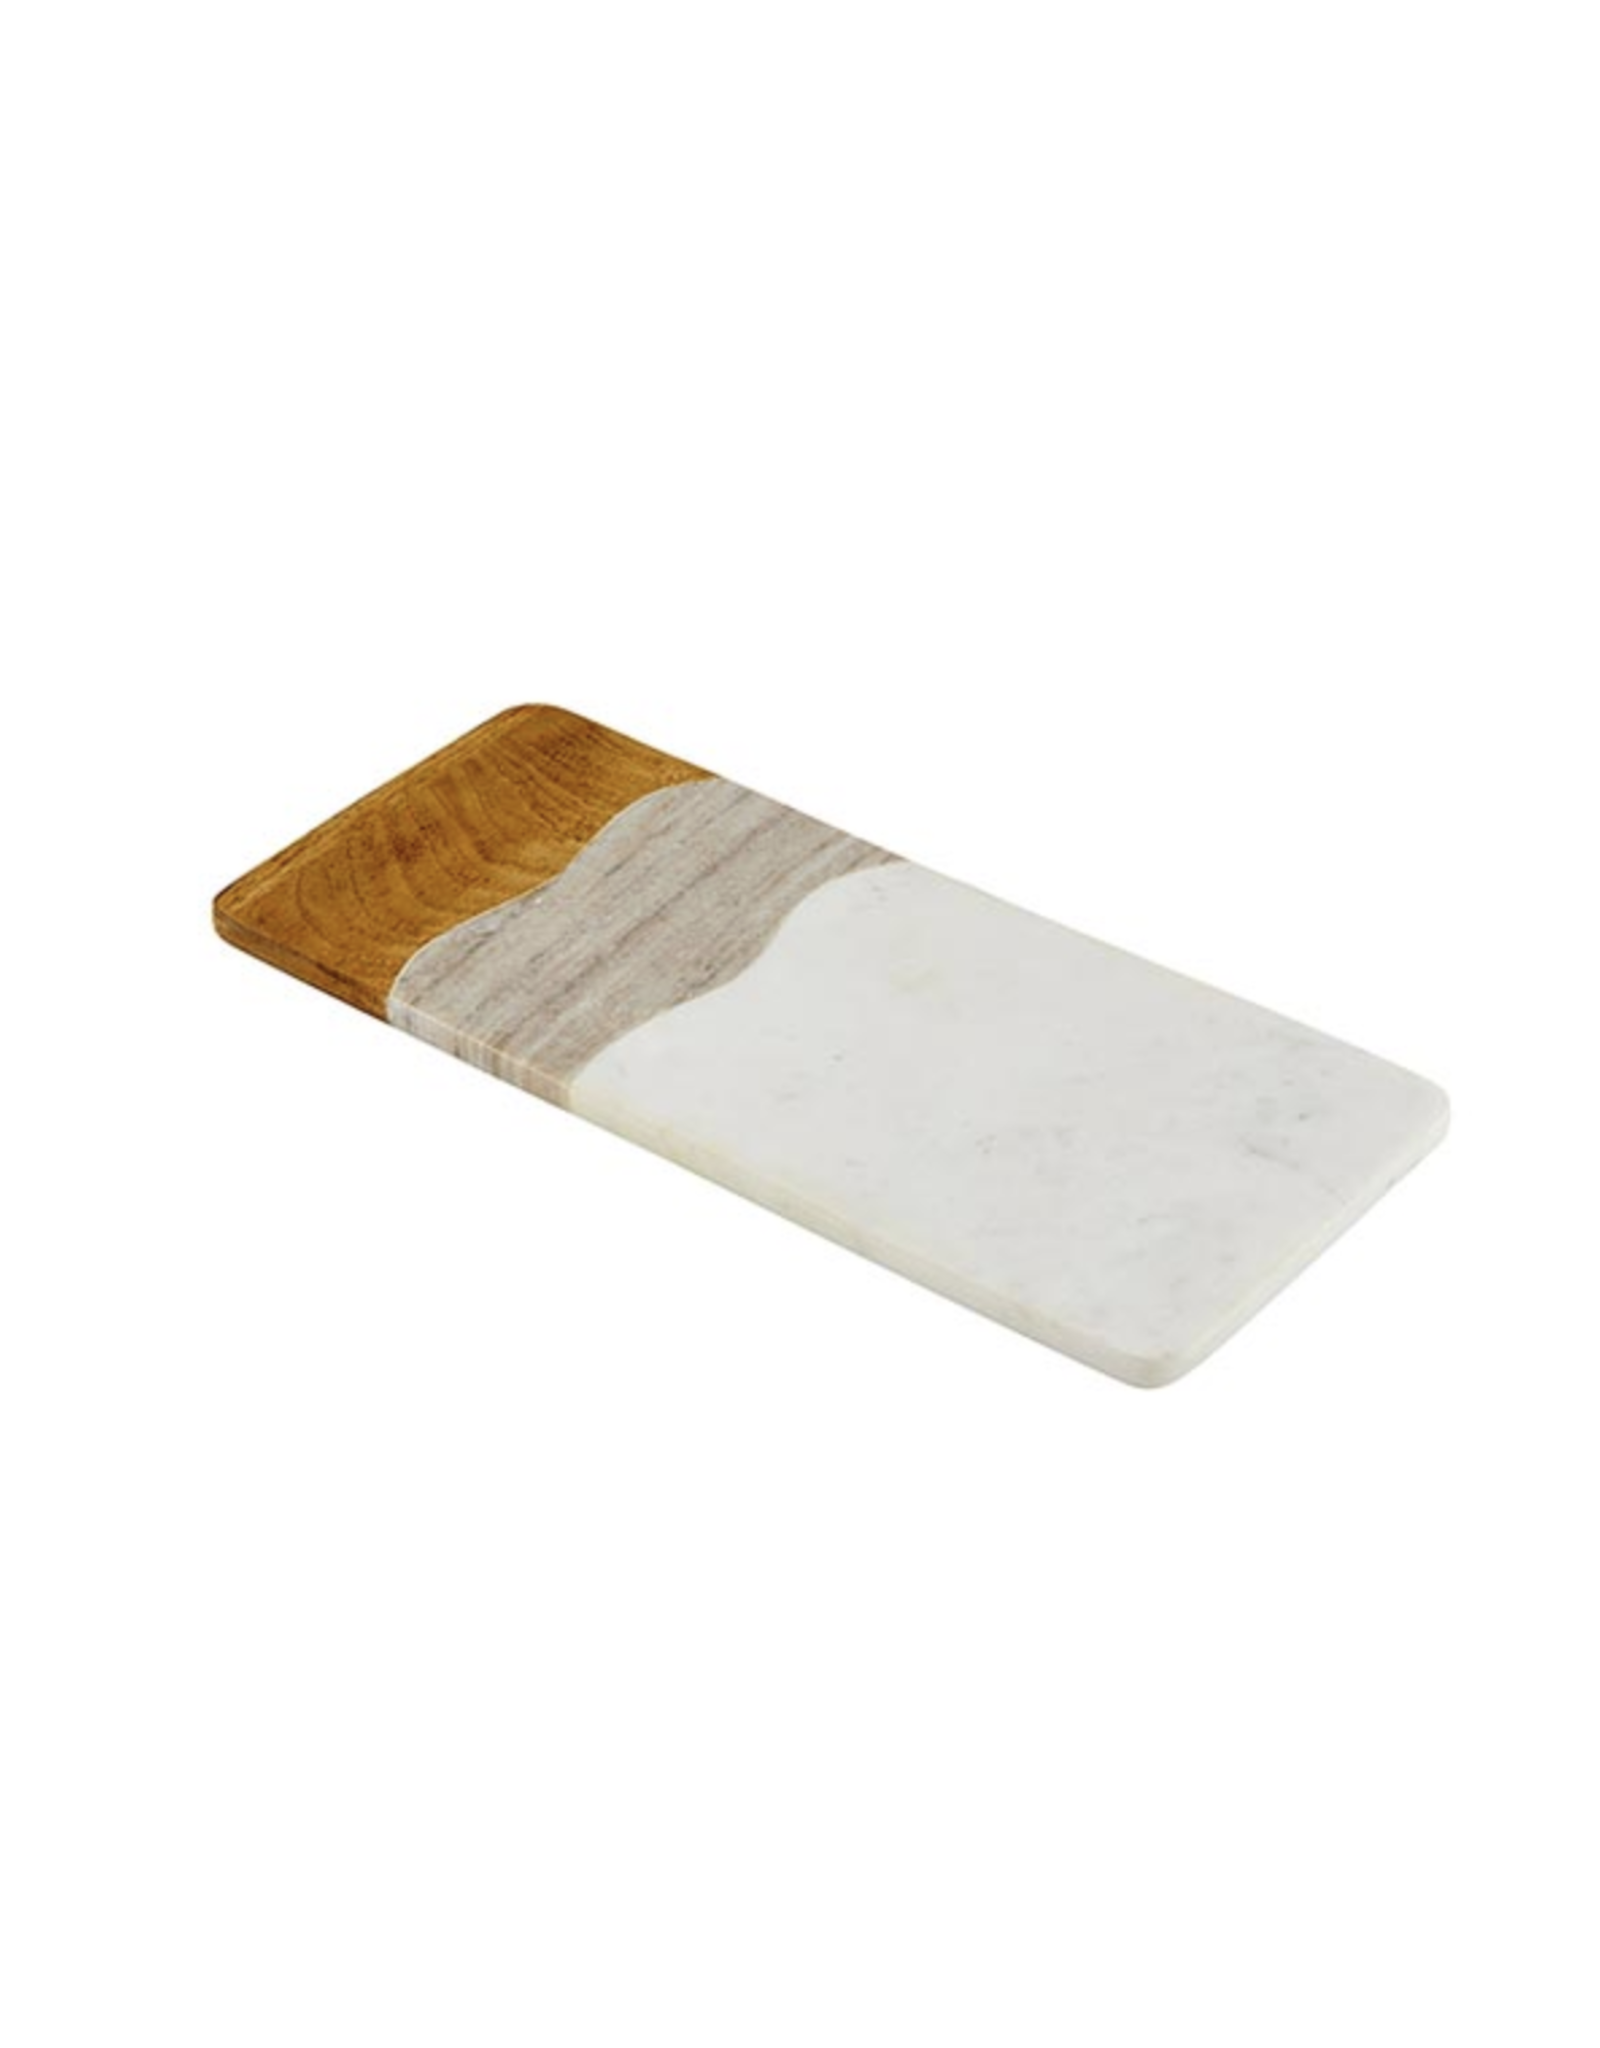 Creative Brands White/Gray Marble with Wood Serving Board